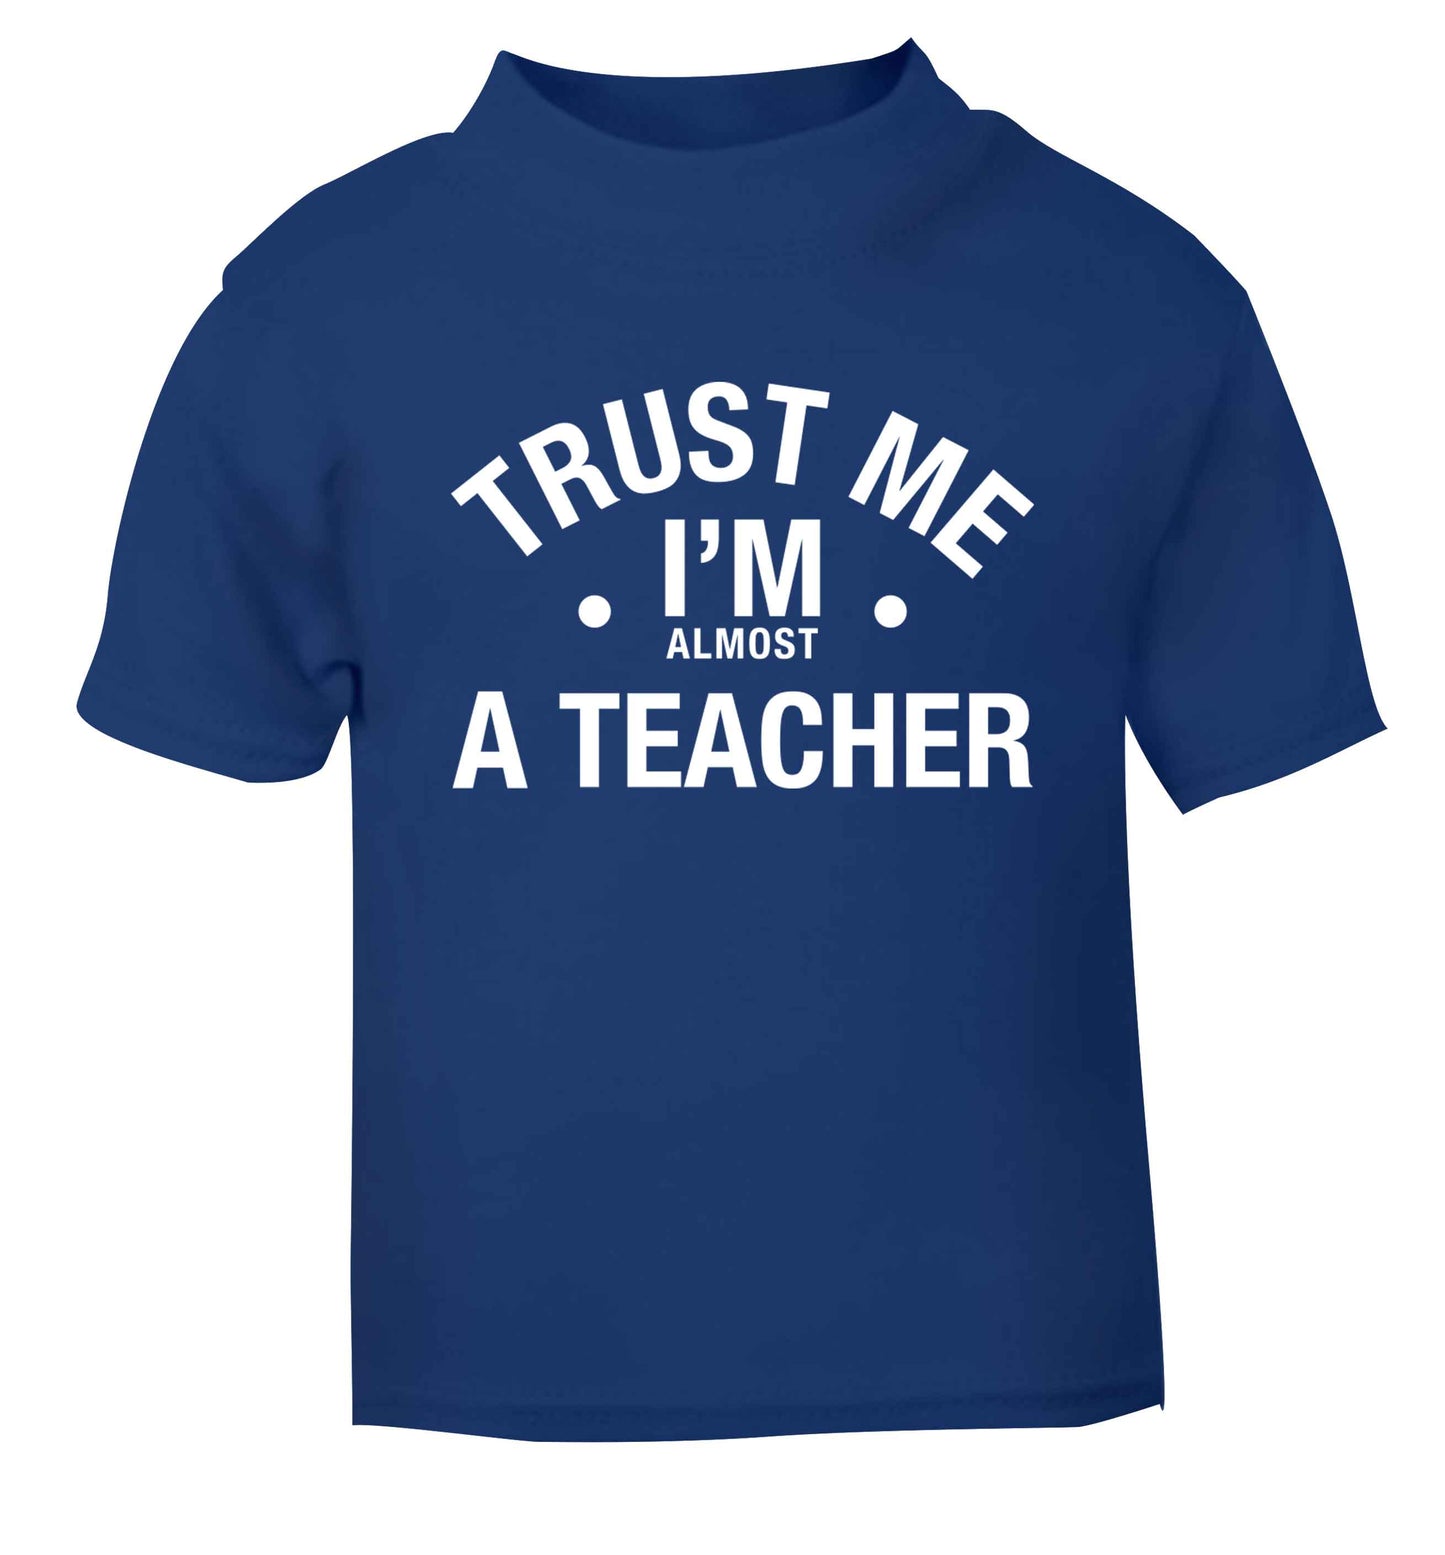 Trust me I'm almost a teacher blue baby toddler Tshirt 2 Years